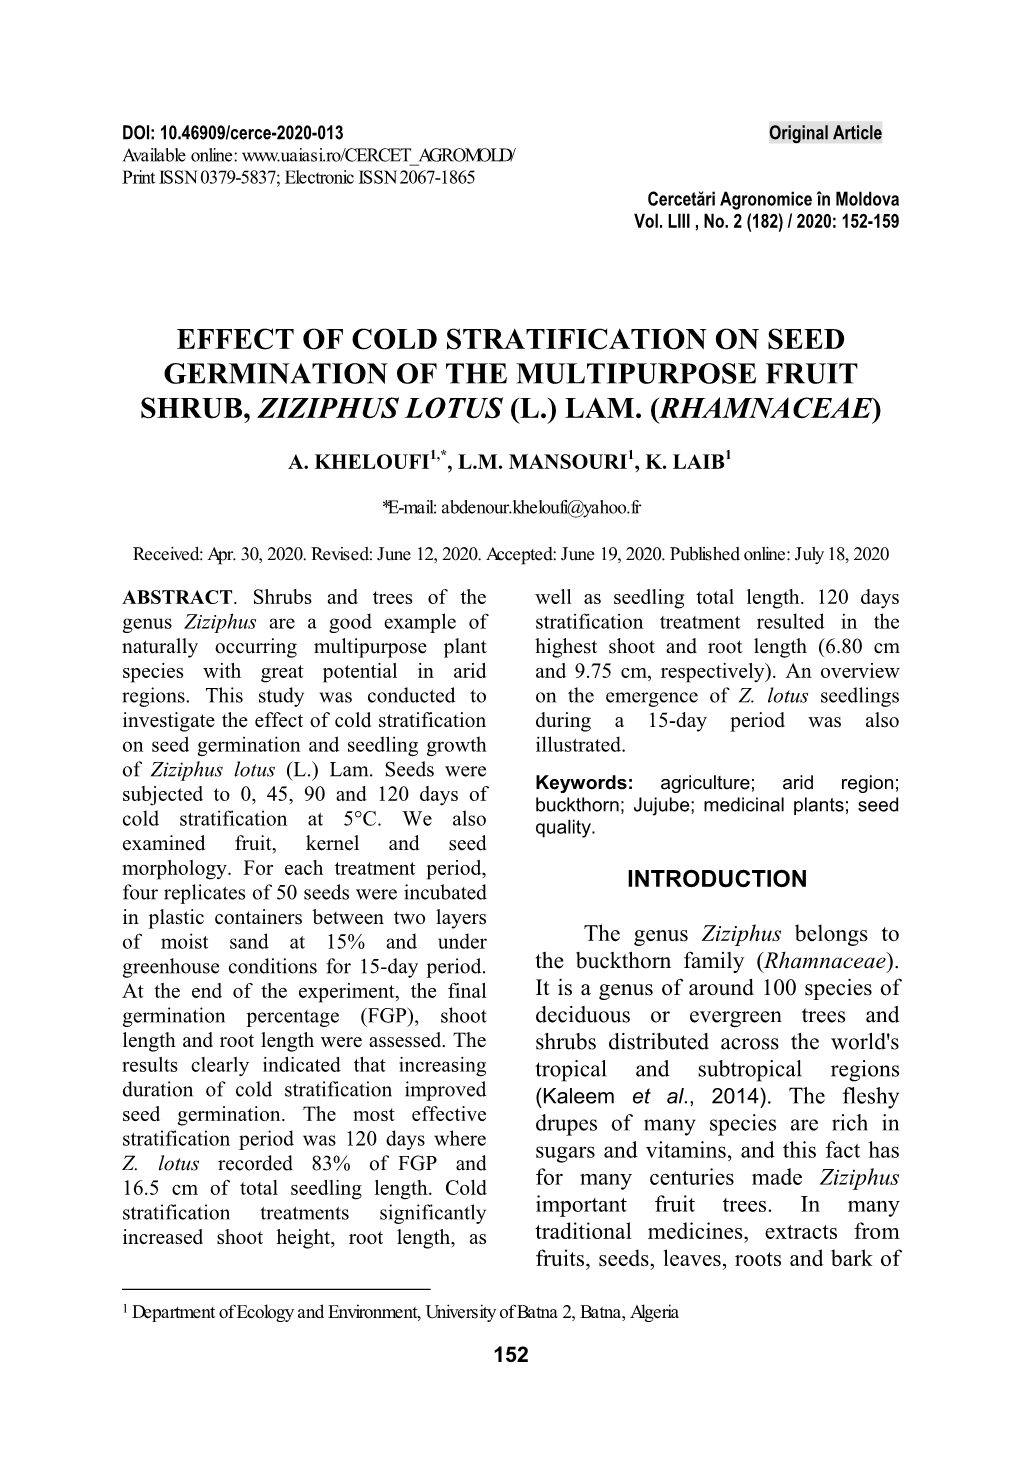 Effect of Cold Stratification on Seed Germination of the Multipurpose Fruit Shrub, Ziziphus Lotus (L.) Lam